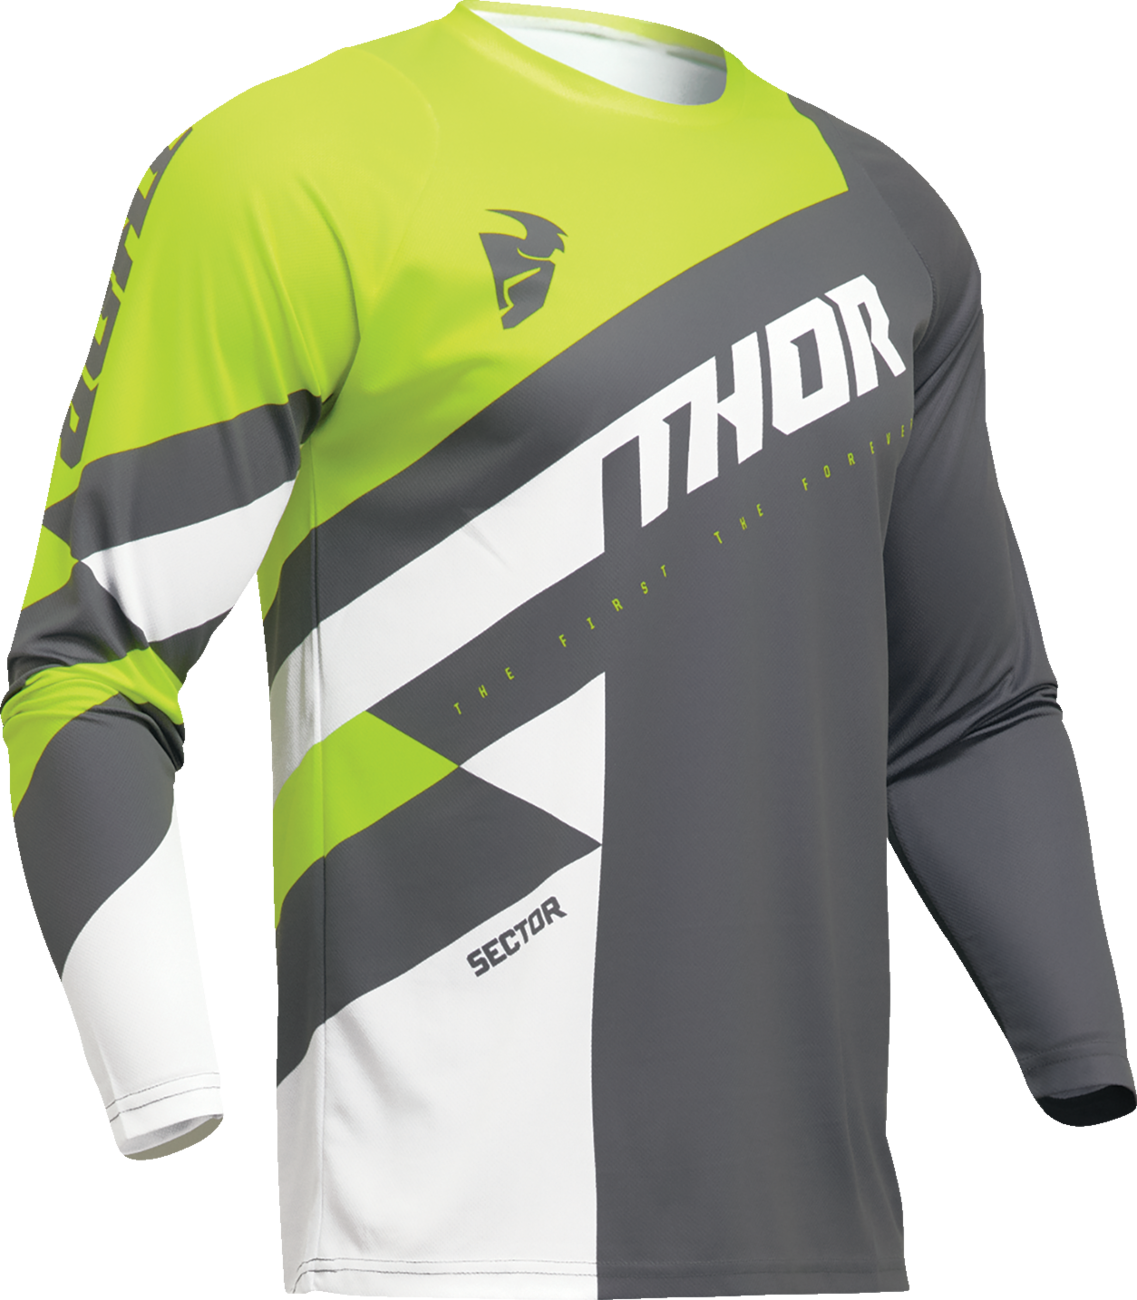 THOR Sector Checker Jersey - Gray/Acid - Large 2910-7596